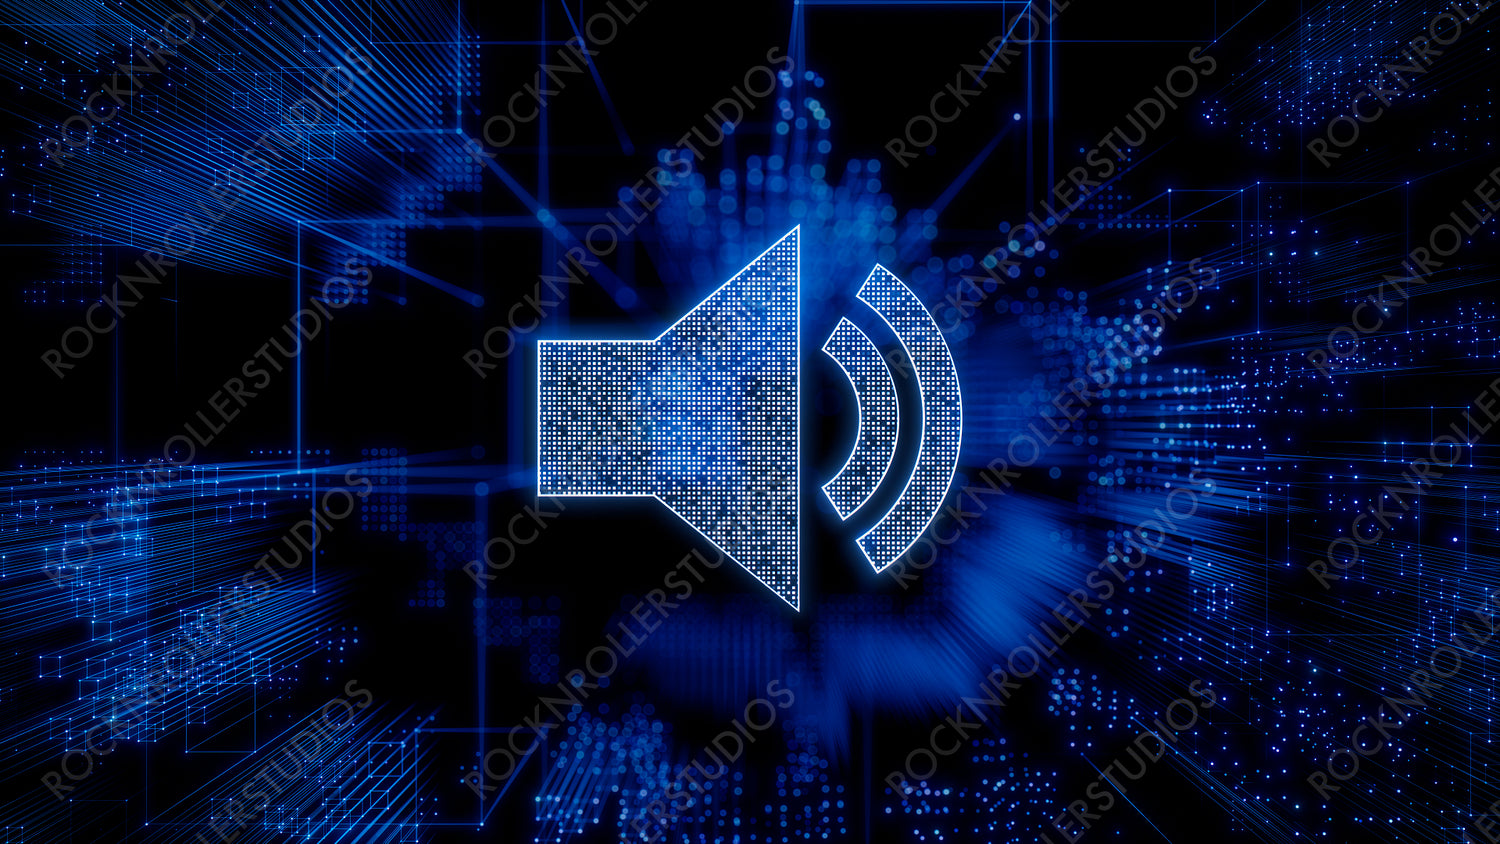 Sound Technology Concept with audio symbol against a Futuristic, Blue Digital Grid background. Network Tech Wallpaper. 3D Render